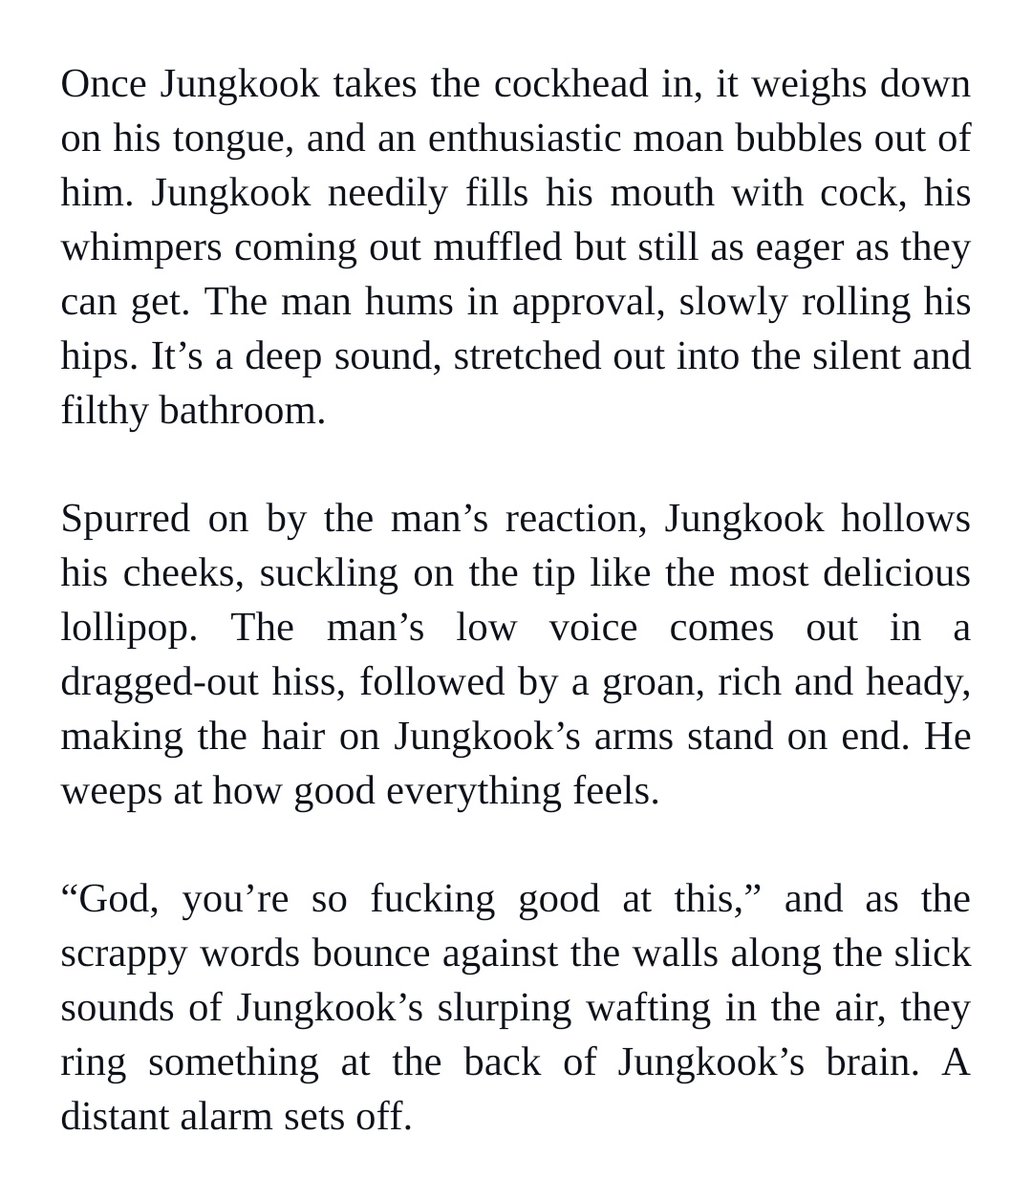 Once Jungkook takes the cockhead in, it weighs down on his tongue, and an enthusiastic moan bubbles out of him. Jungkook needily fills his mouth with cock, his whimpers coming out muffled but still as eager as they can get. The man hums in approval, slowly rolling his hips. It’s a deep sound, stretched out into the silent and filthy bathroom.


Spurred on by the man’s reaction, Jungkook hollows his cheeks, suckling on the tip like the most delicious lollipop. The man’s low voice comes out in a dragged-out hiss, followed by a groan, rich and heady, making the hair on Jungkook’s arms stand on end. He weeps at how good everything feels.


“God, you’re so fucking good at this,” and as the scrappy words bounce against the walls along the slick sounds of Jungkook’s slurping wafting in the air, they ring something at the back of Jungkook’s brain. A distant alarm sets off.